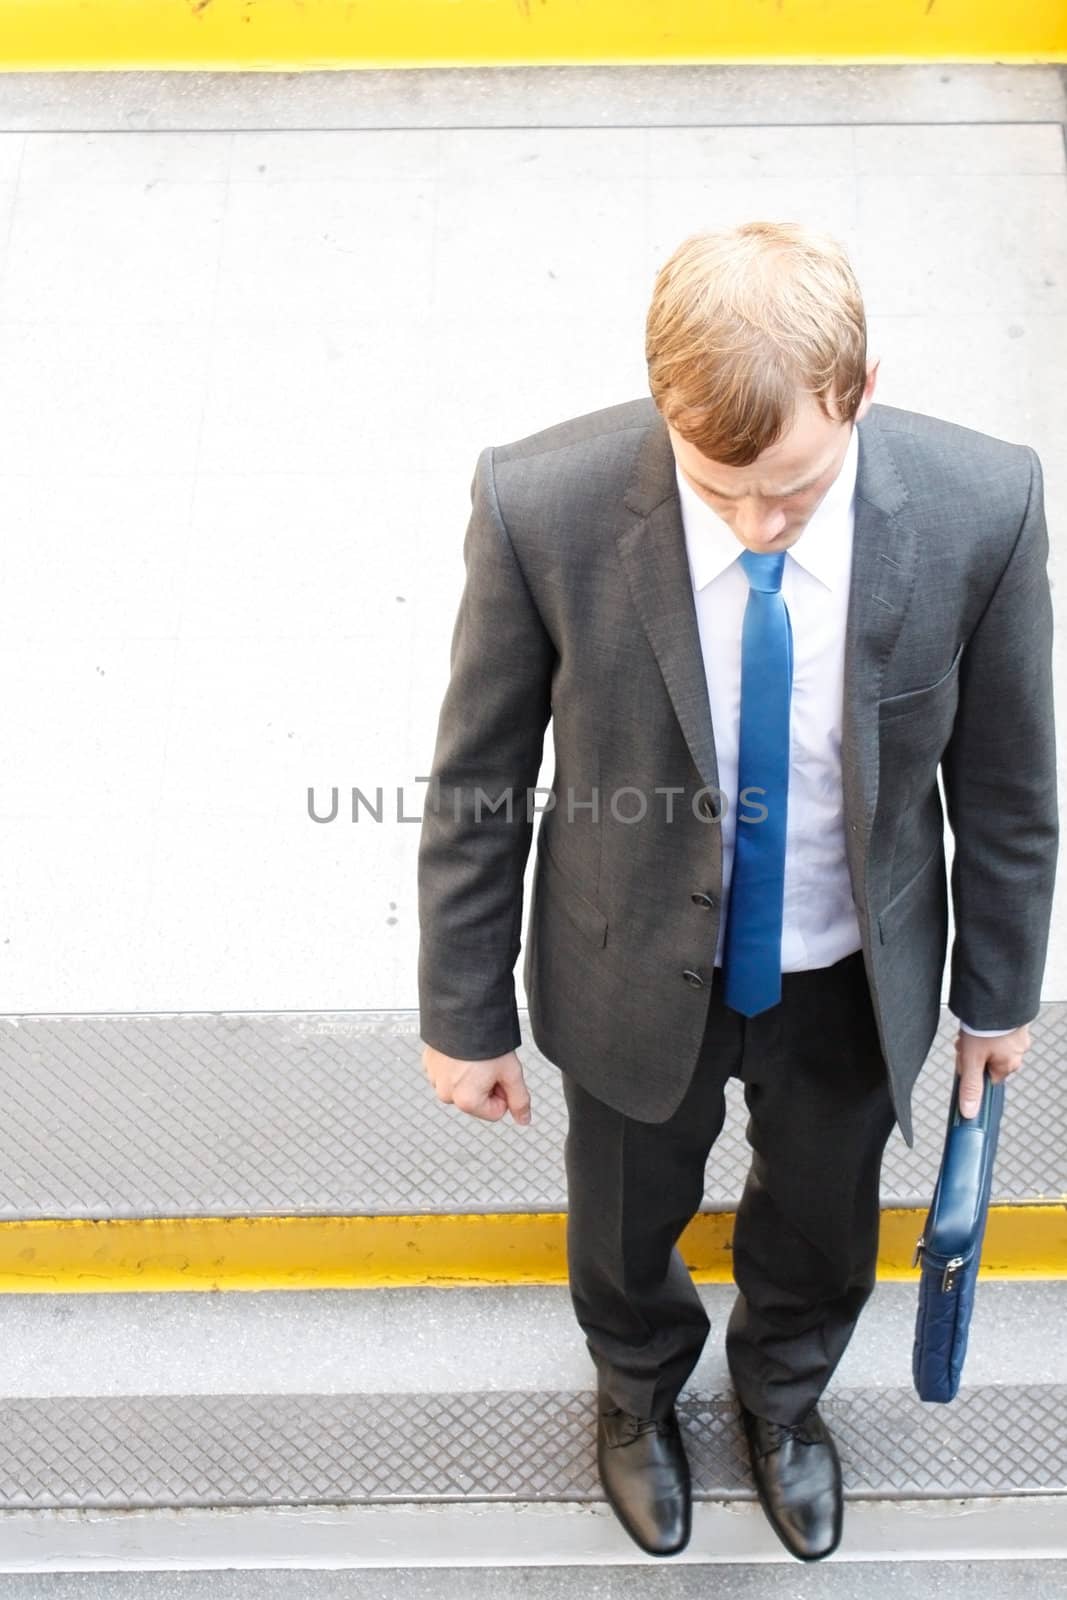 A business man walking down some steps